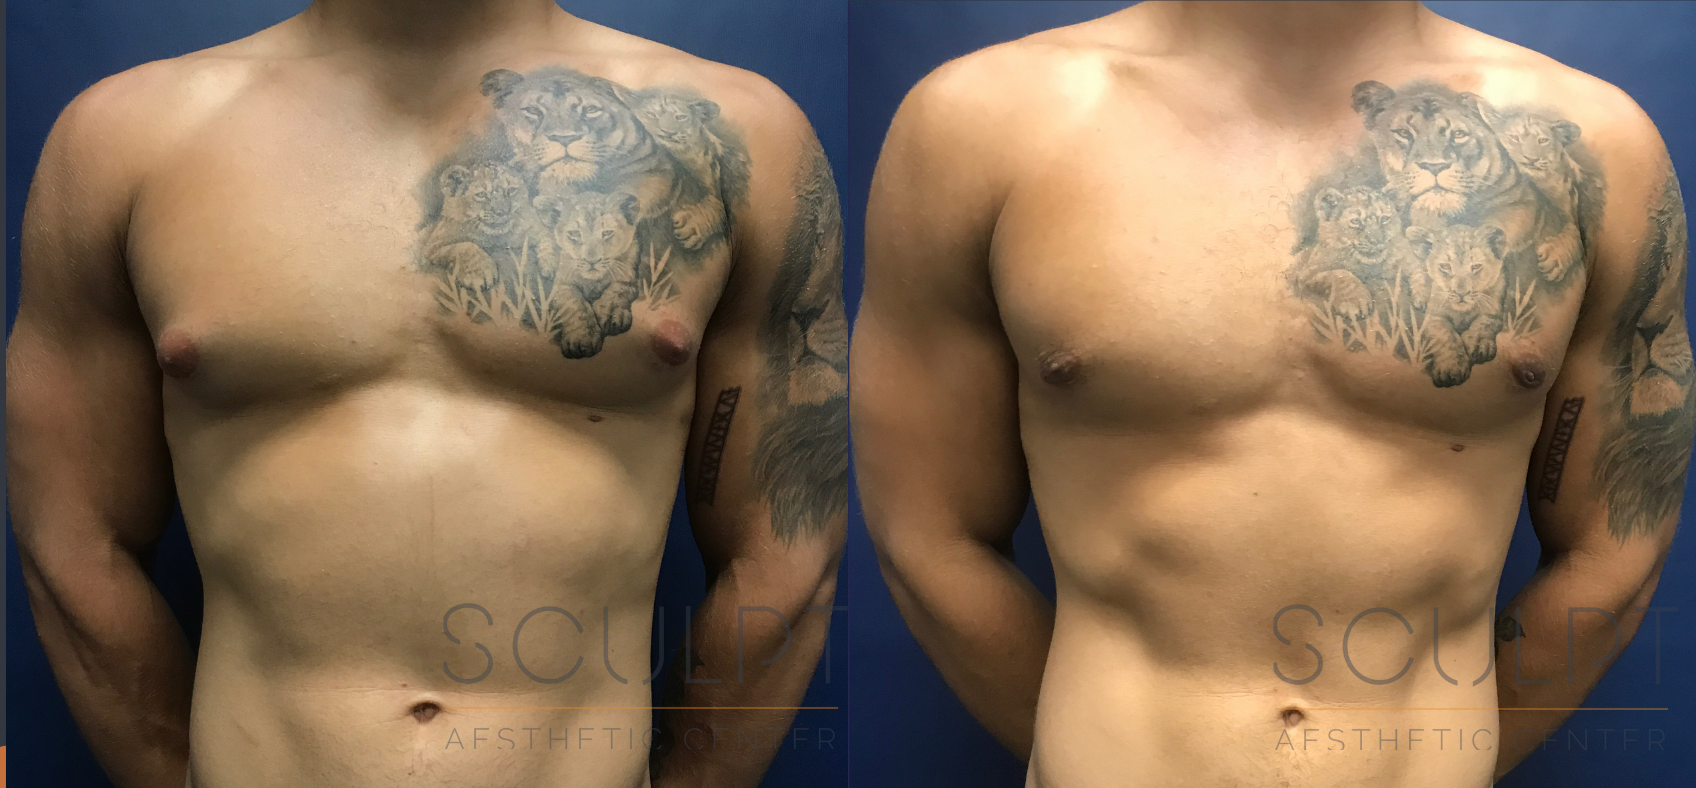 Gynecomastia Excision Before and After Photo by Sculpt Aesthetic Center in Frisco, TX